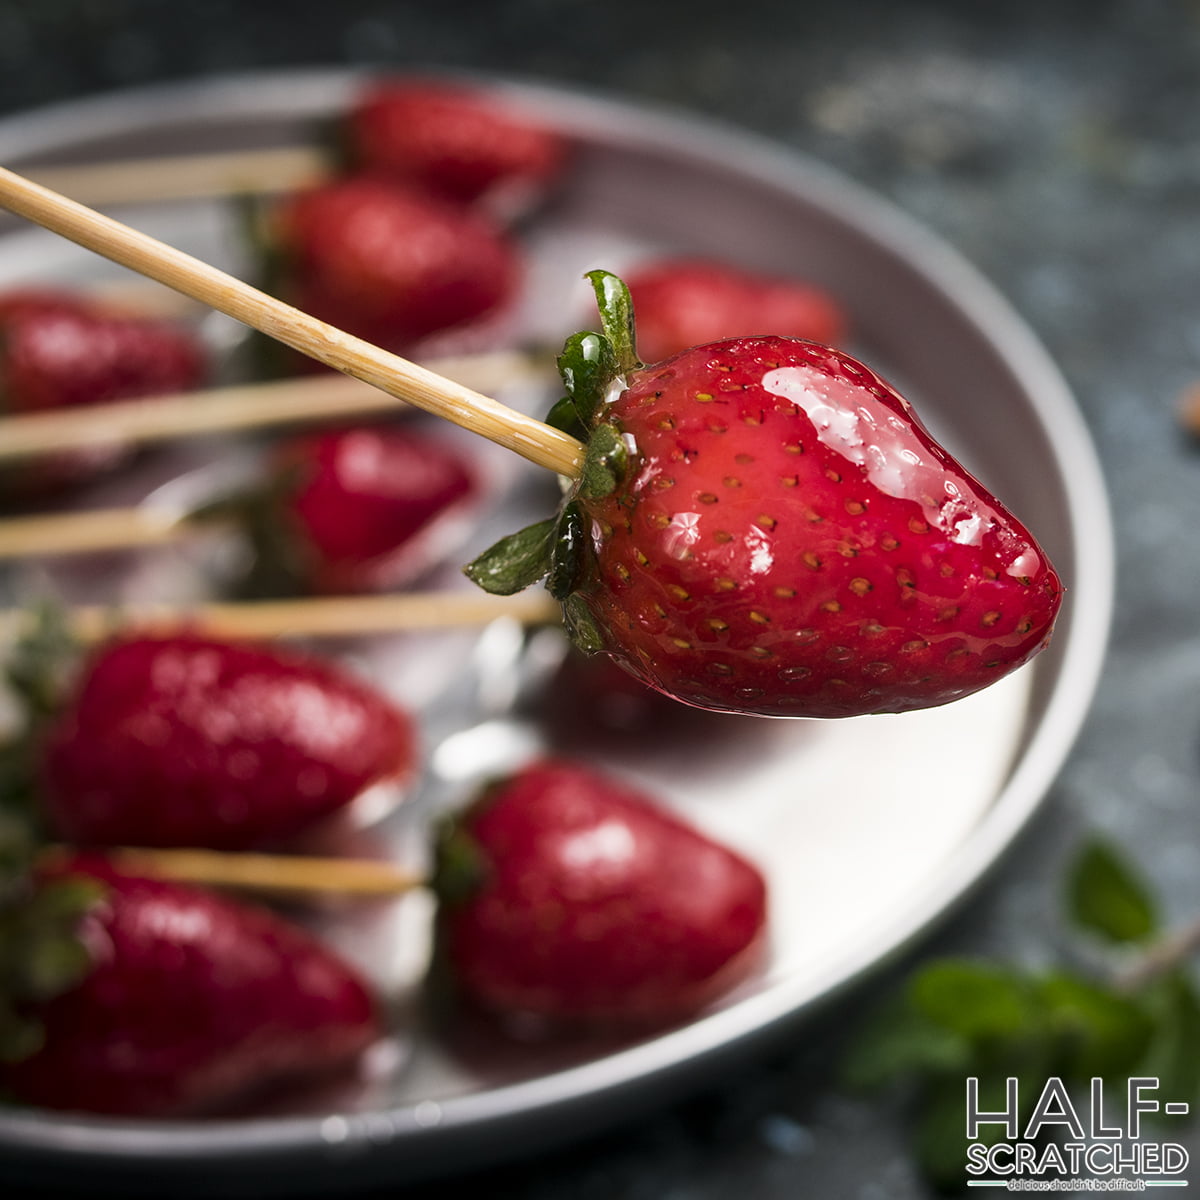 Candied Strawberries Without Corn Syrup recipe